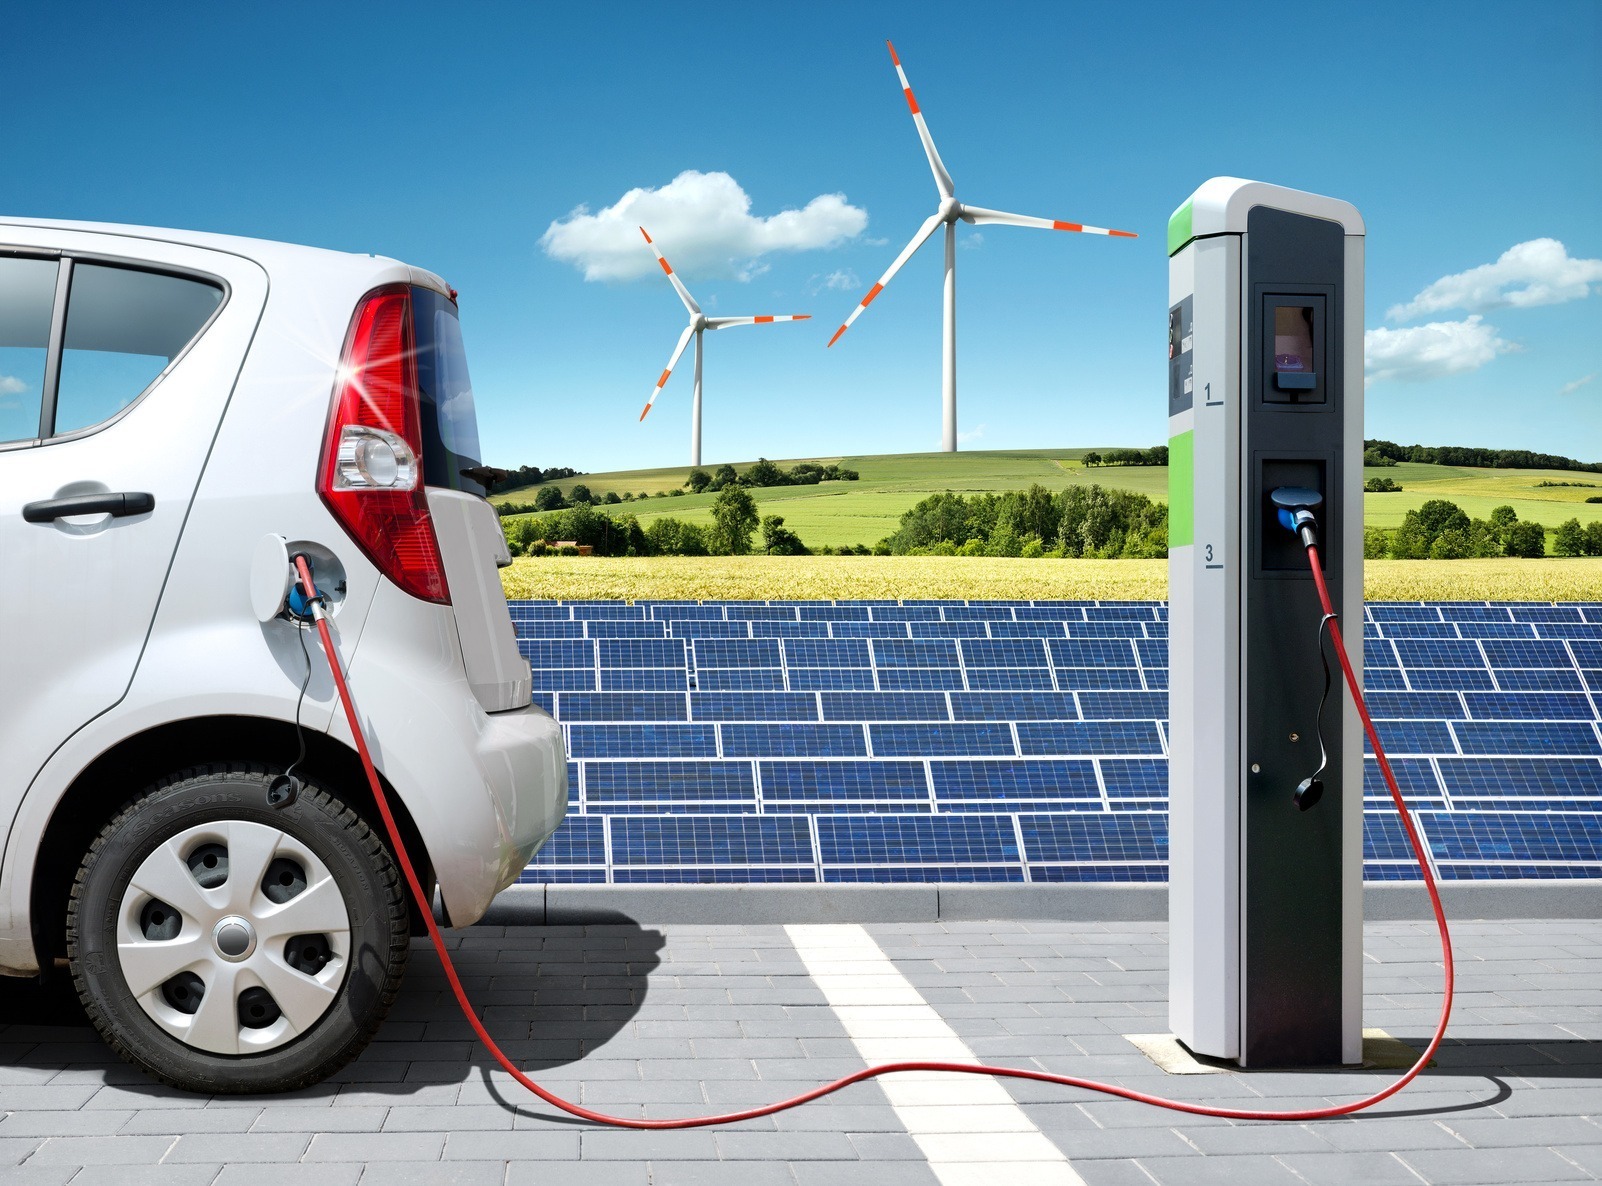 Electric car at the solar charging station © Petair / Fotolia.com.